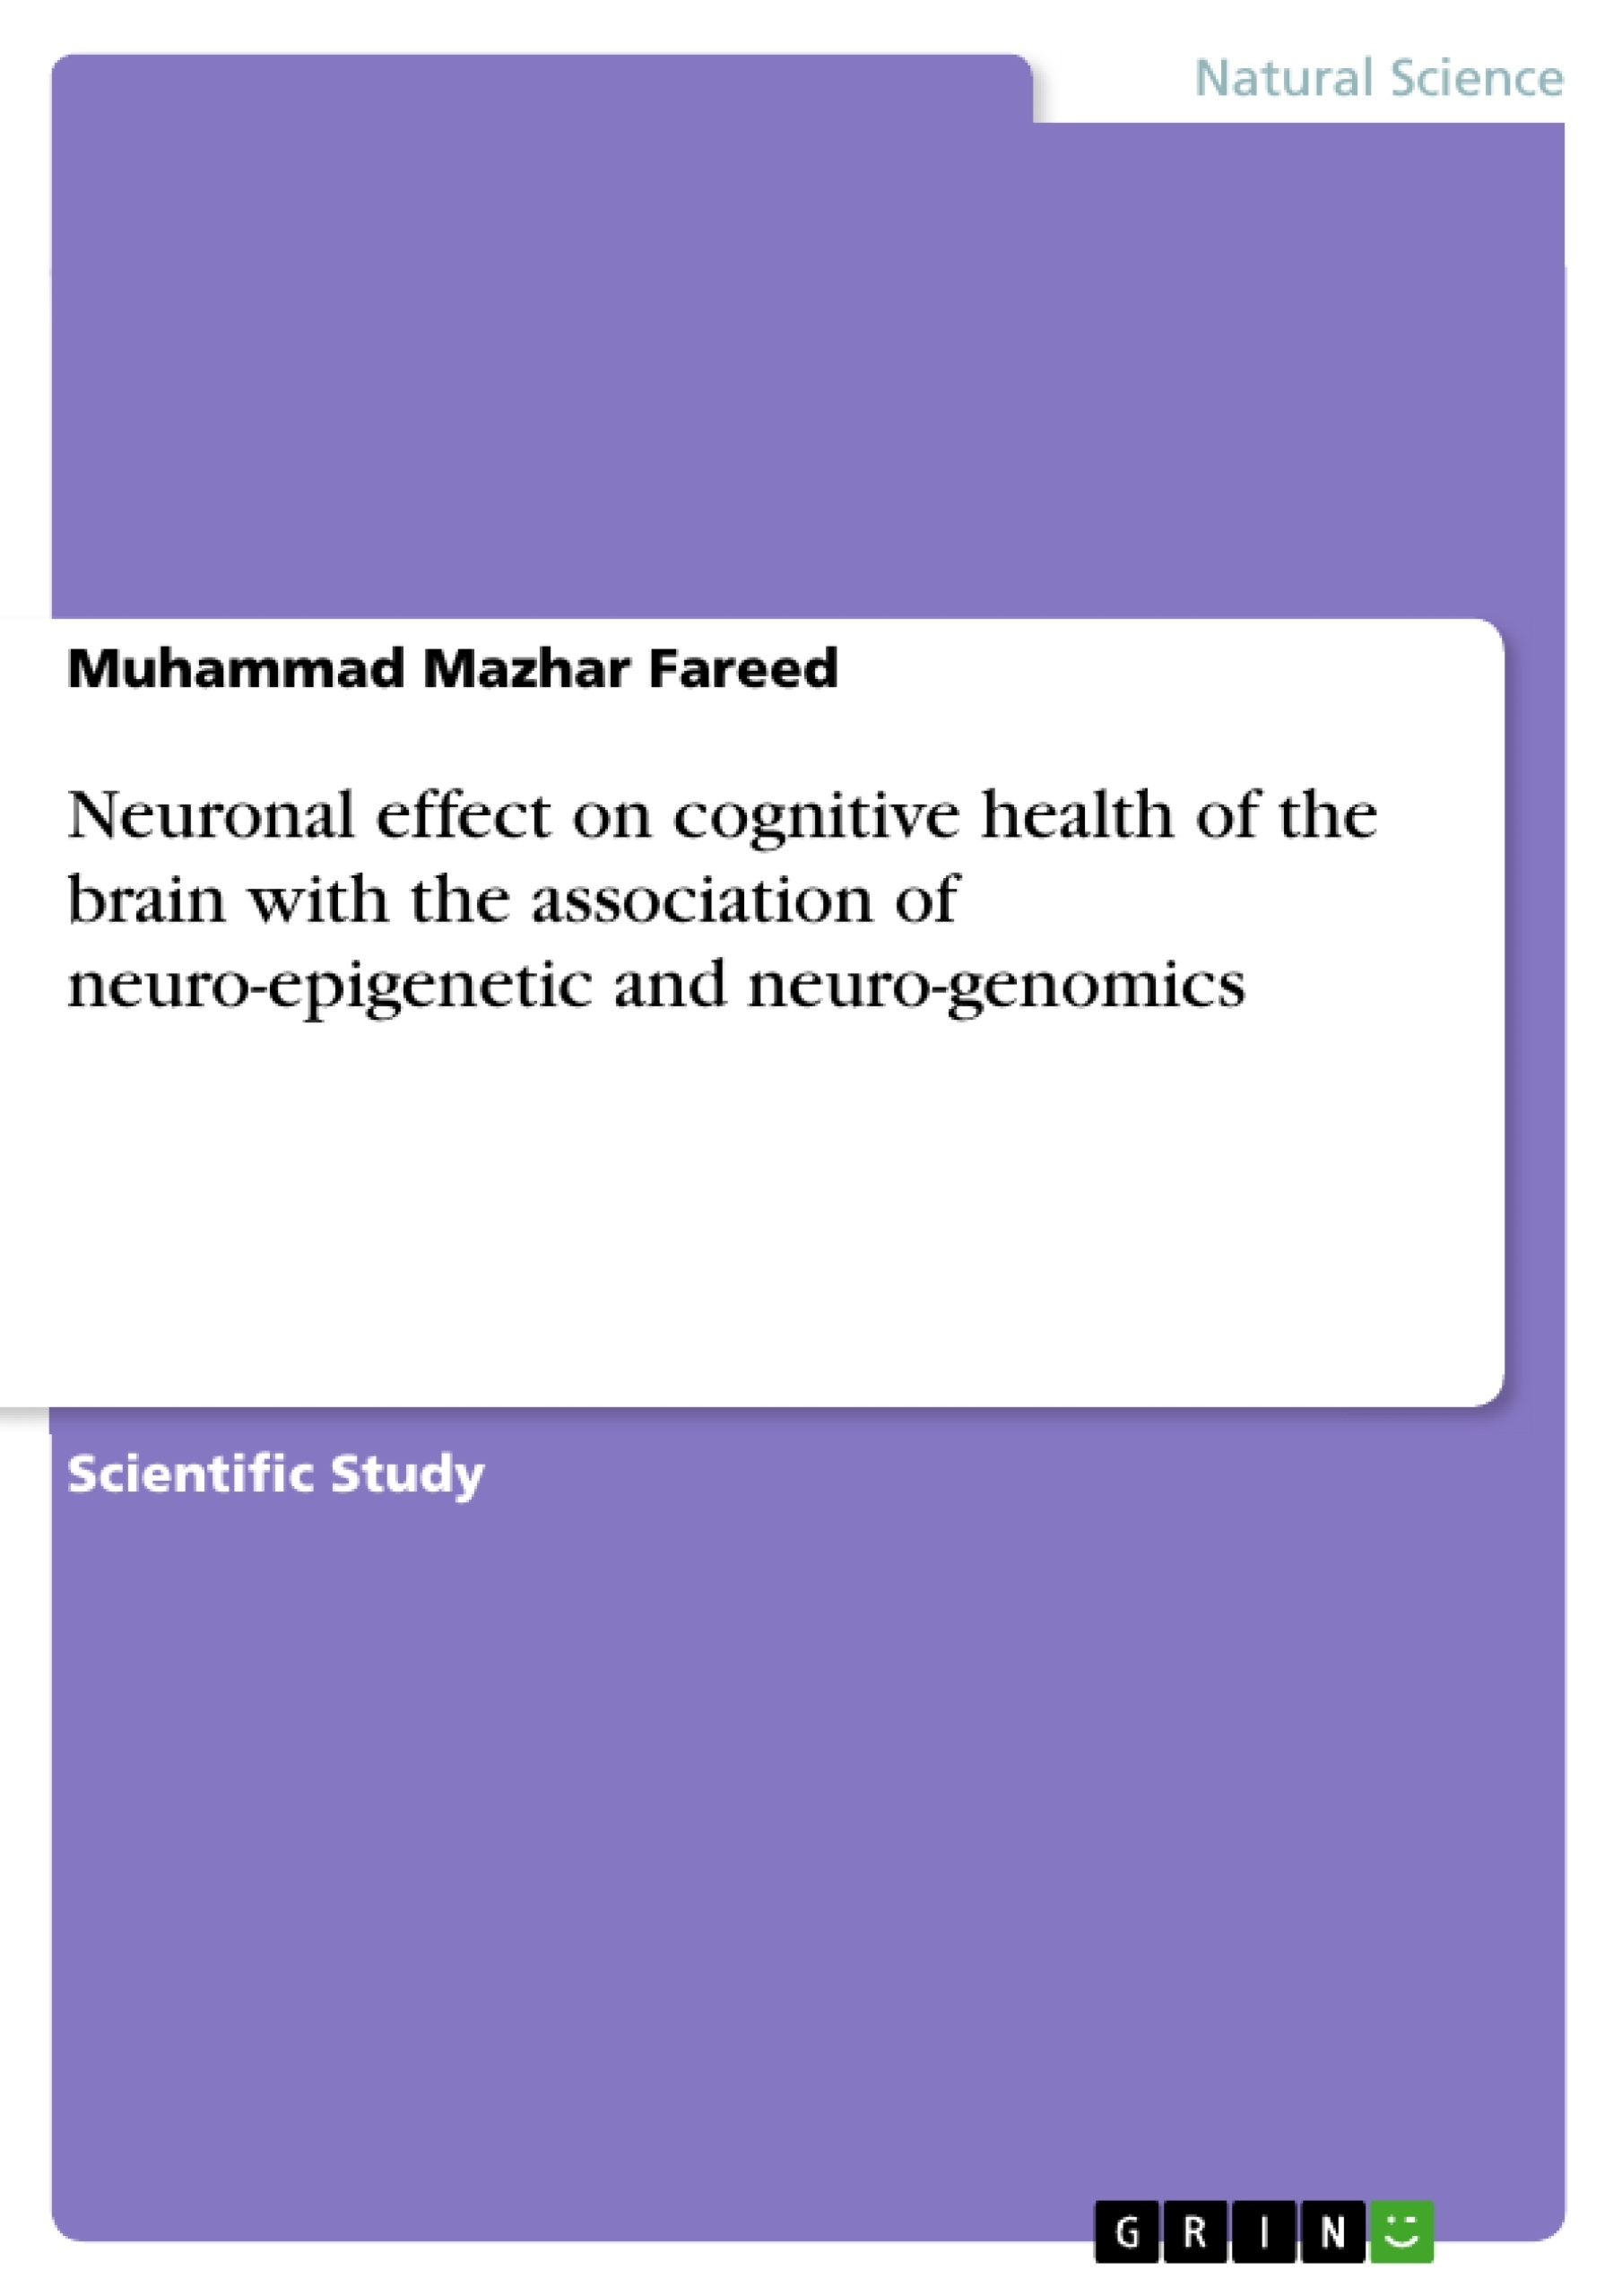 Title: Neuronal effect on cognitive health of the brain with the association of neuro-epigenetic and neuro-genomics